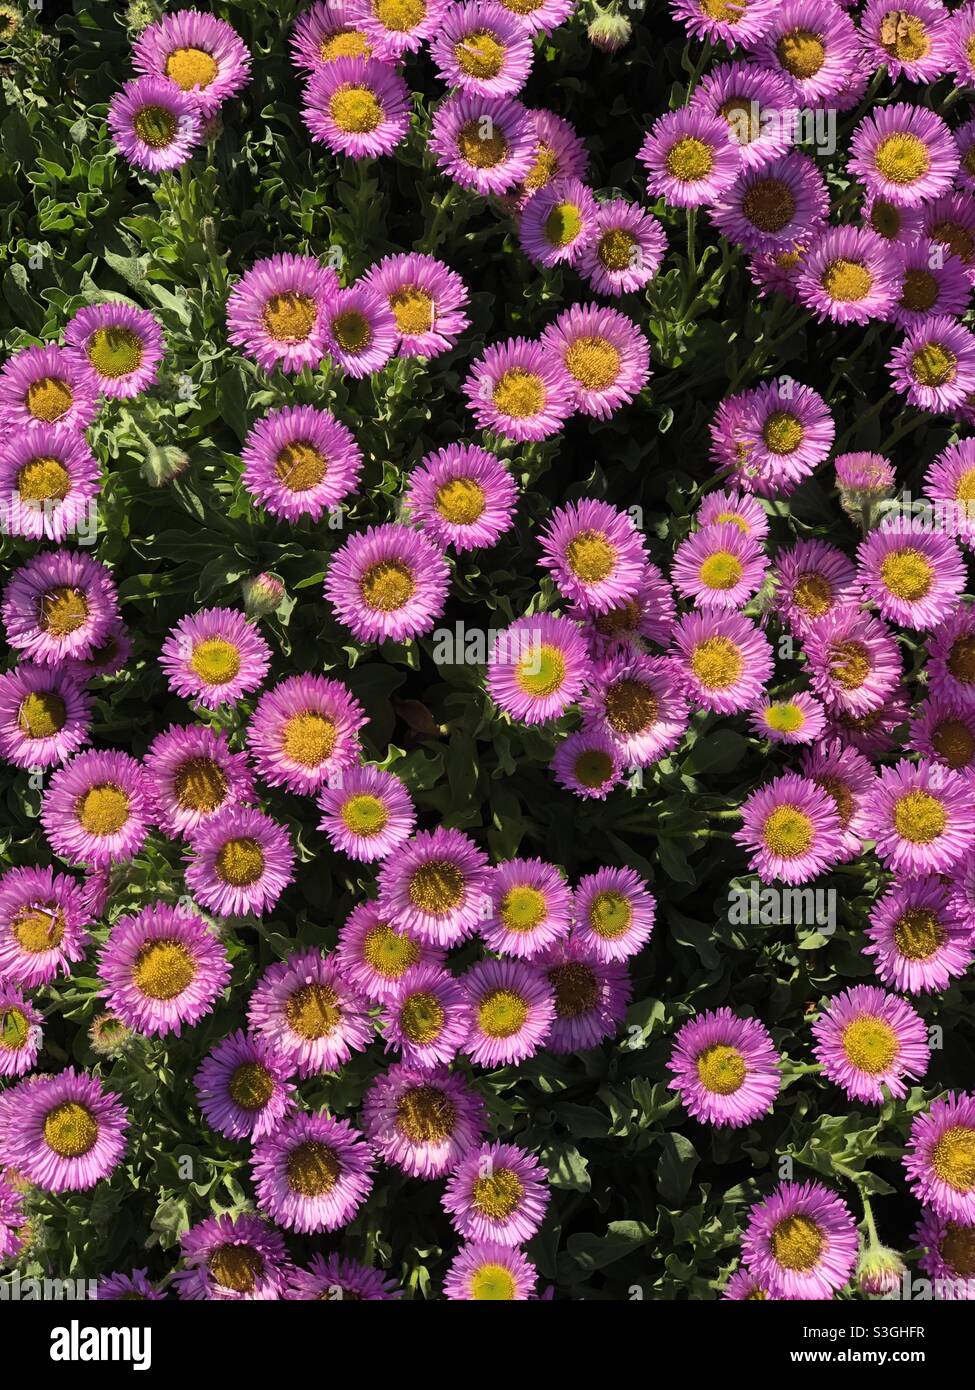 Candy Pink Daisies (Fleabane) Stock Photo